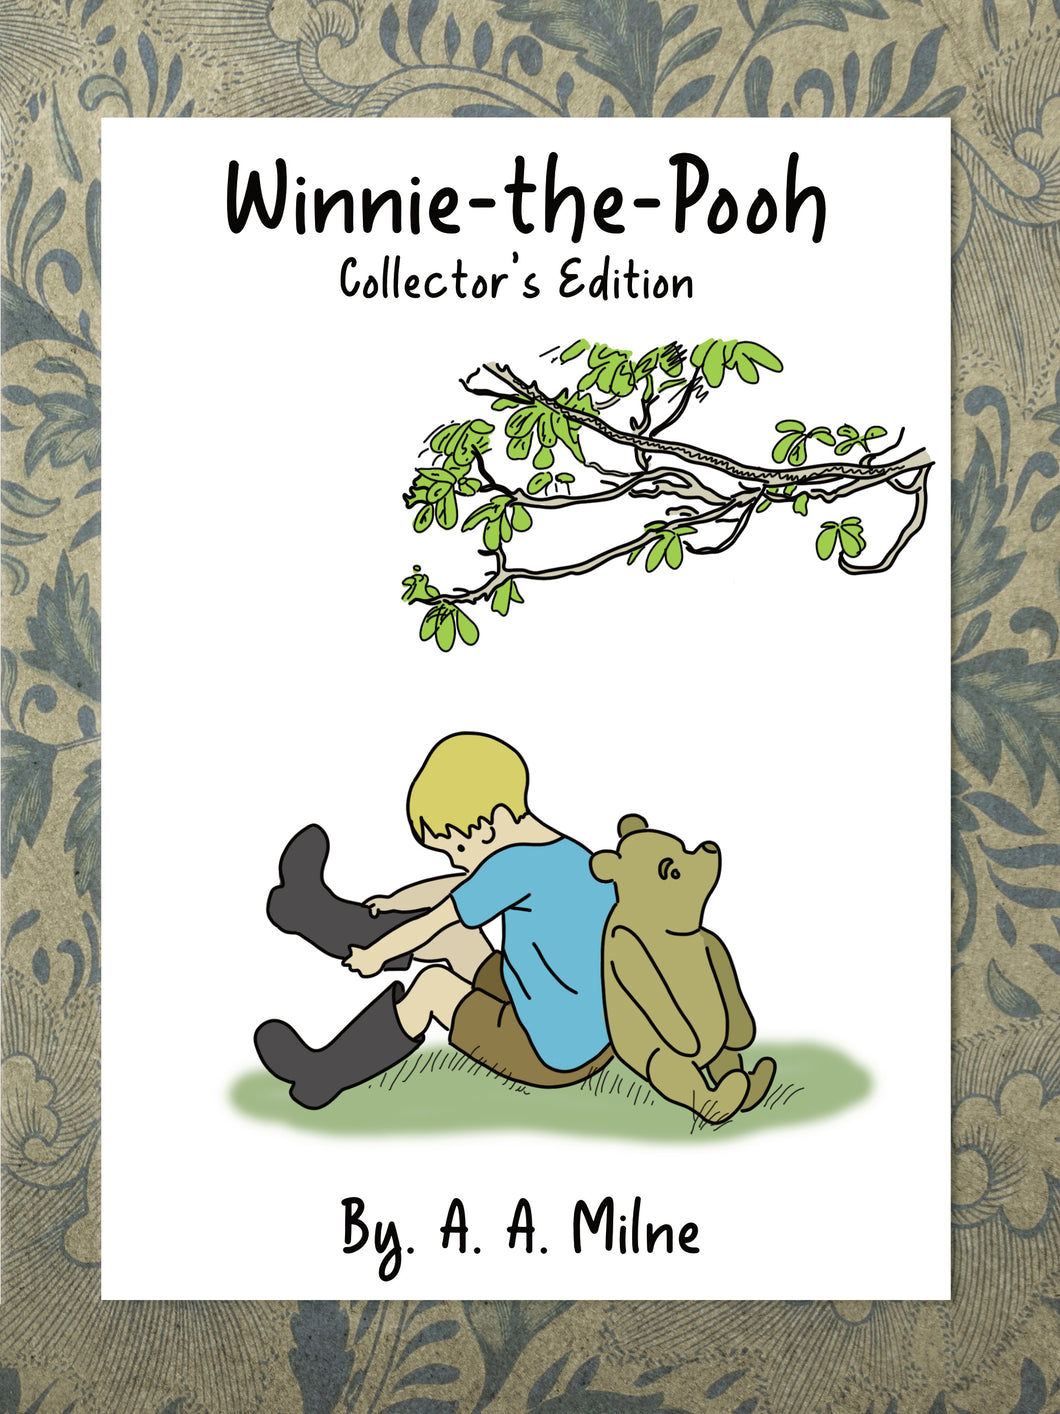 Winnie-the-Pooh: Collector's Edition (Ebook)